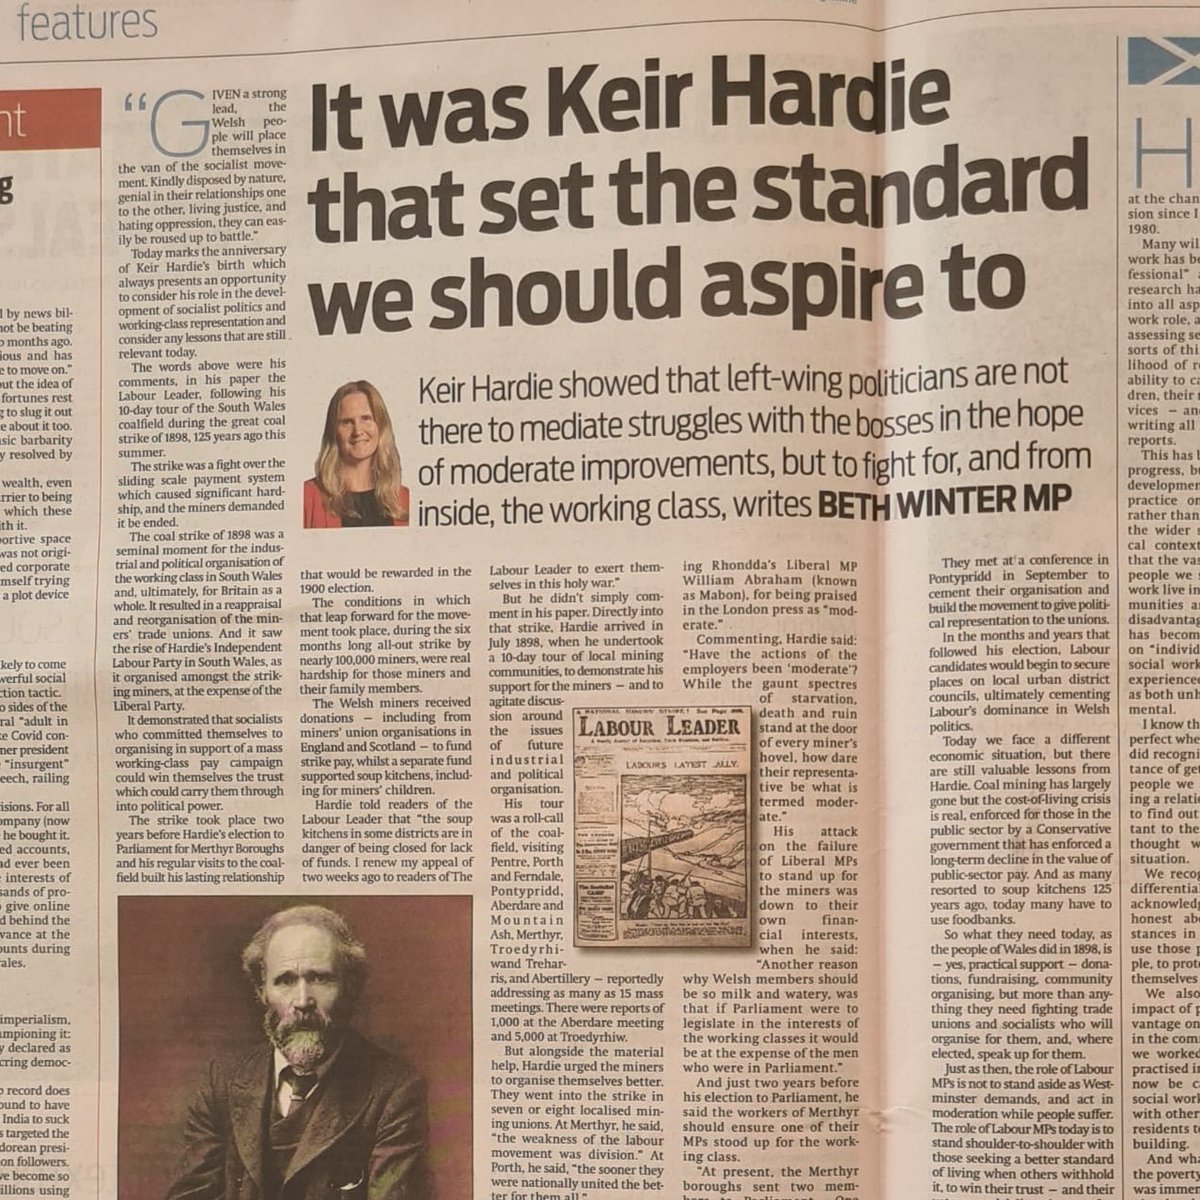 On Keir Hardie's birthday, I've written for @M_Star_Online on his tour of the Welsh Valleys 125 years ago to support striking coal miners. His solidarity built the foundation to become Wales' first Labour MP for Merthyr in 1900. 𝘔𝘢𝘬𝘦 𝘴𝘶𝘳𝘦 𝘺𝘰𝘶 𝘣𝘶𝘺 𝘢 𝘤𝘰𝘱𝘺.